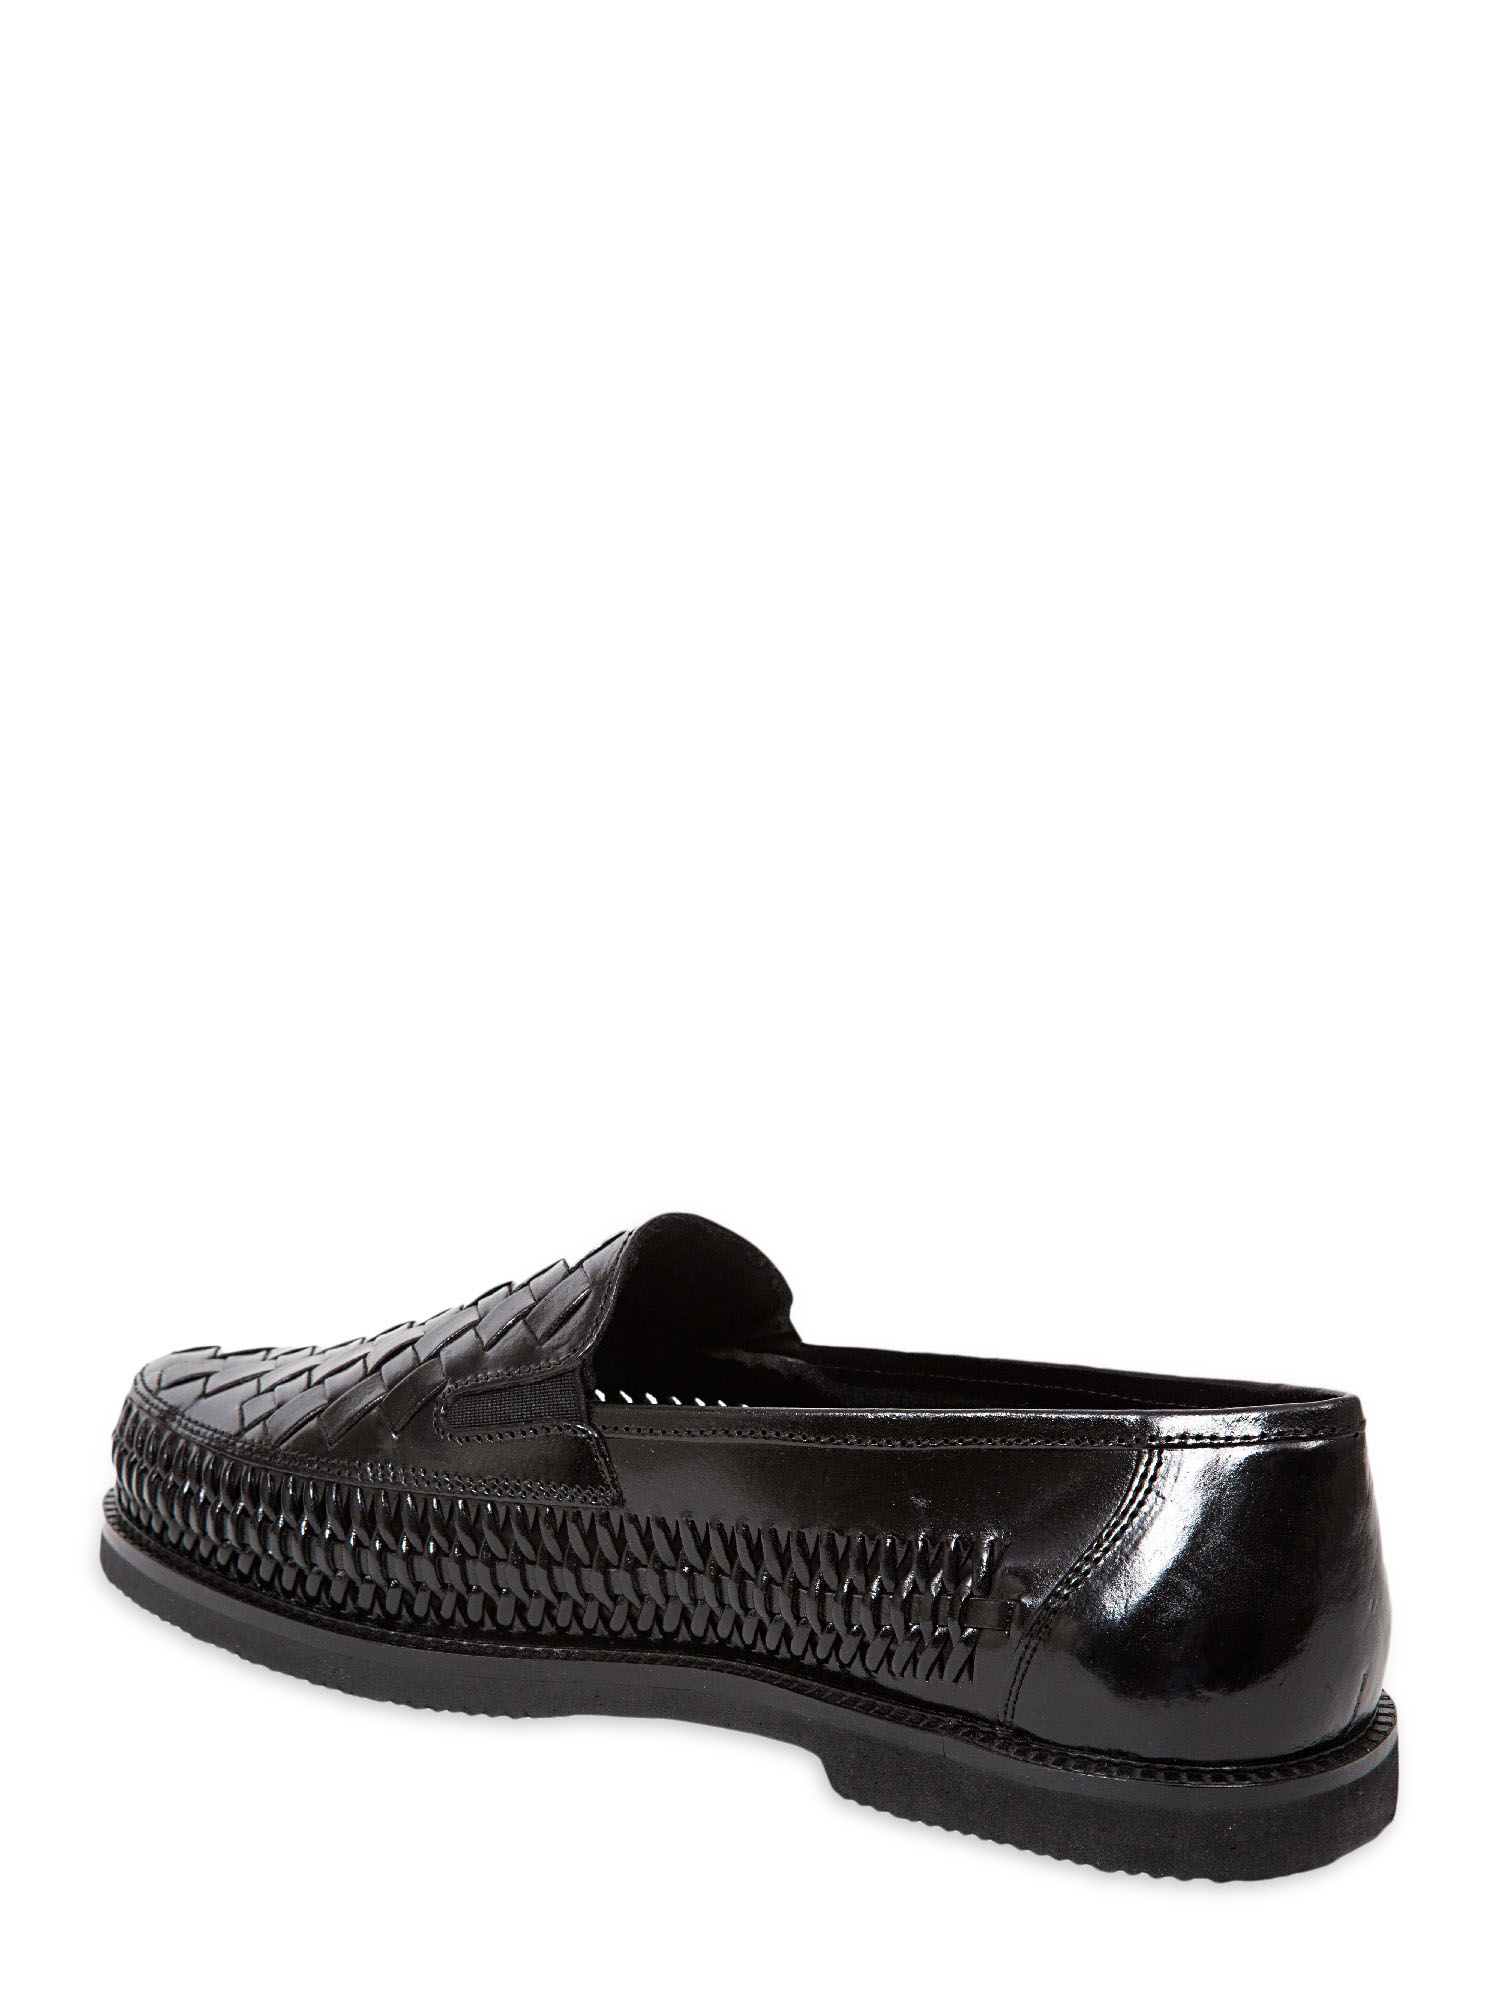 Deer Stags Men's Tijuana Classic Dress Loafer (Wide Available) - image 3 of 9